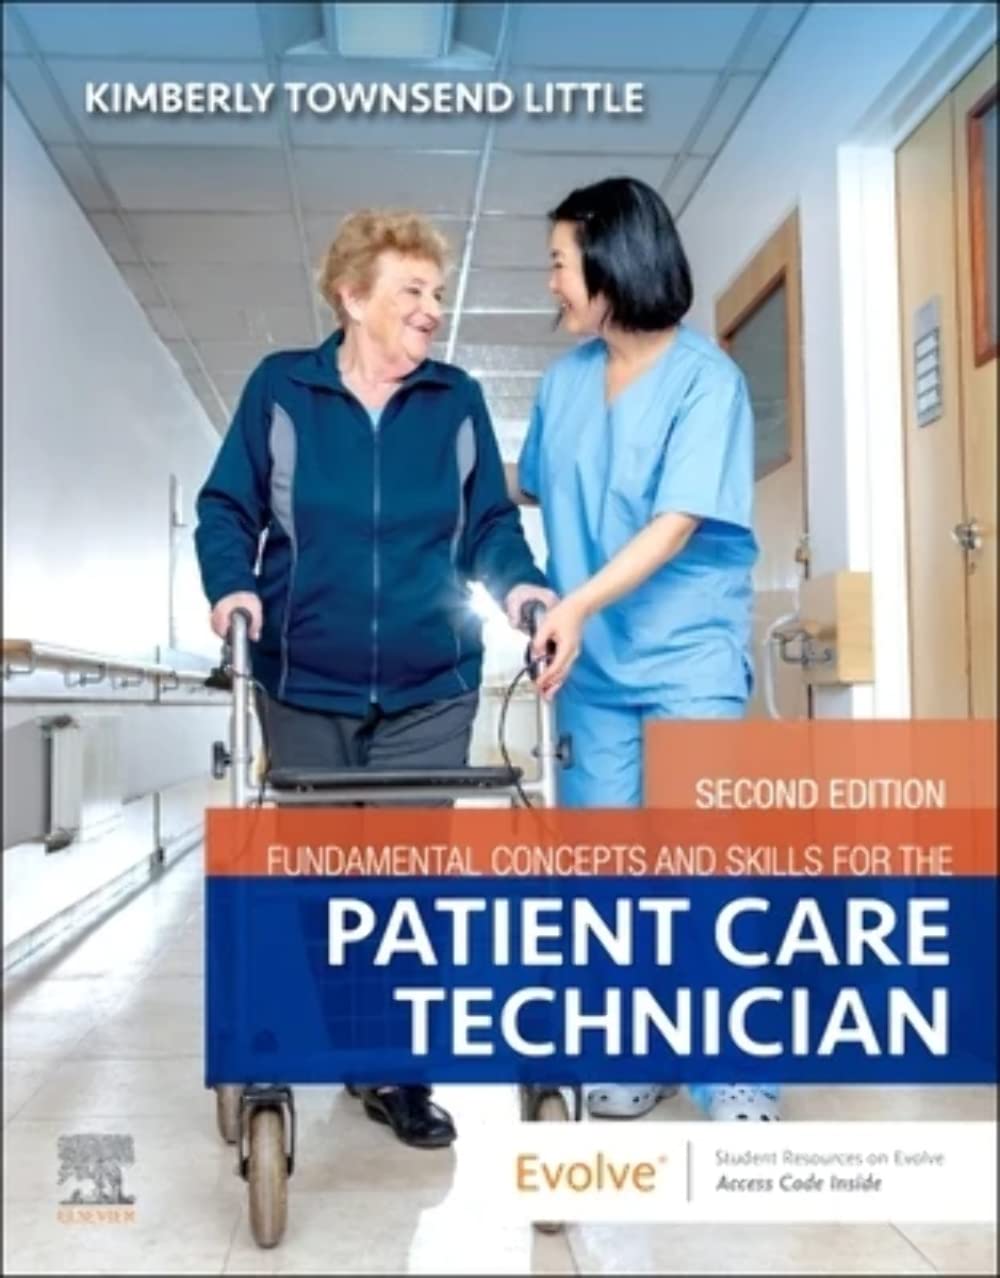 Fundamental Concepts and Skills for the Patient Care Technician, 2nd Edition  by Kimberly Townsend Little PhD RN WHNP-BC CNE 